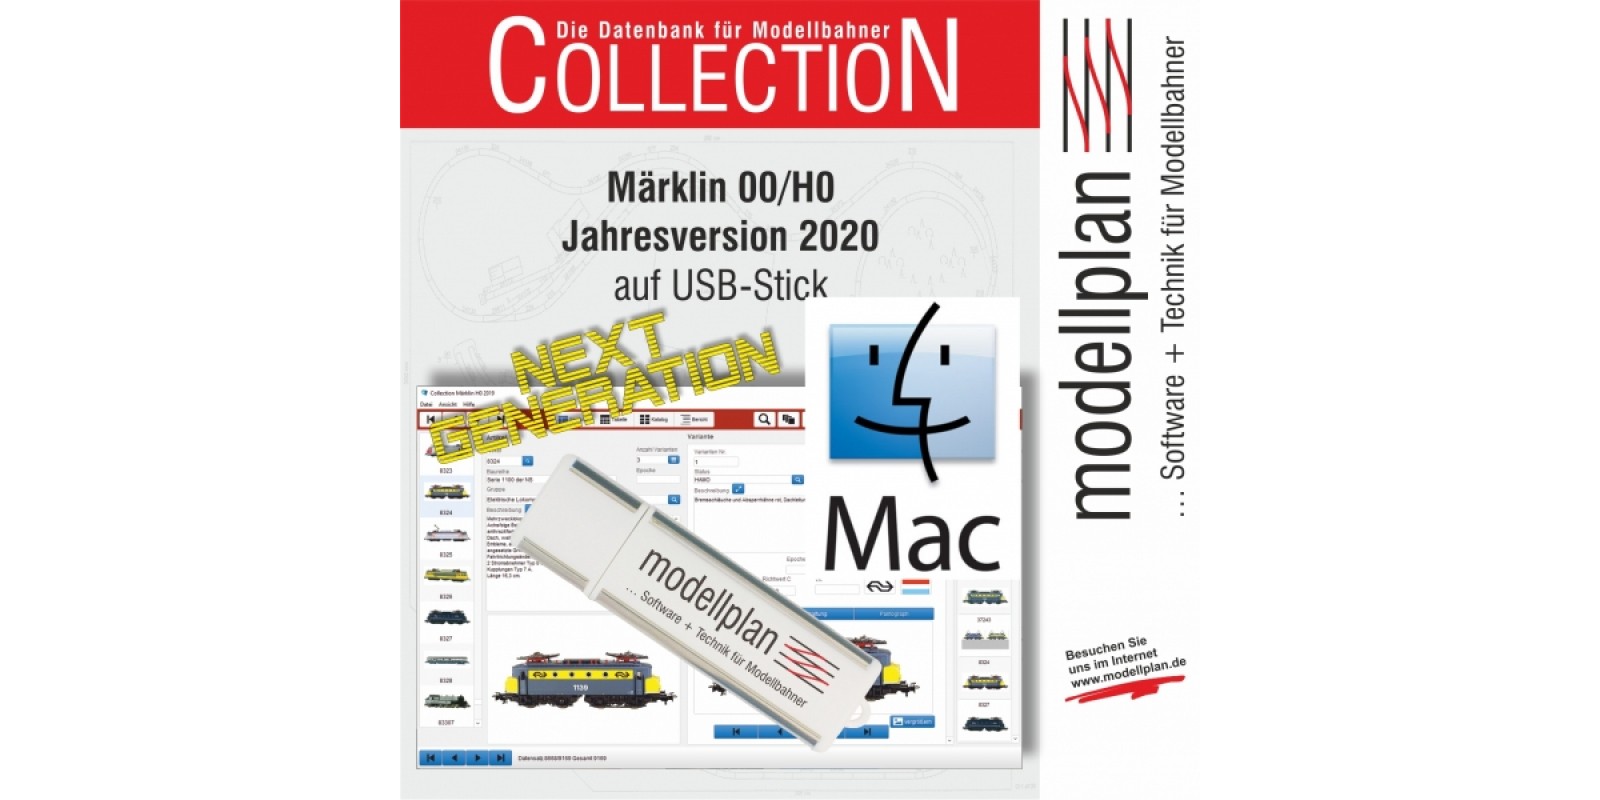 MP73120mac COLLECTION exchange of annual version 2020 as Mac version